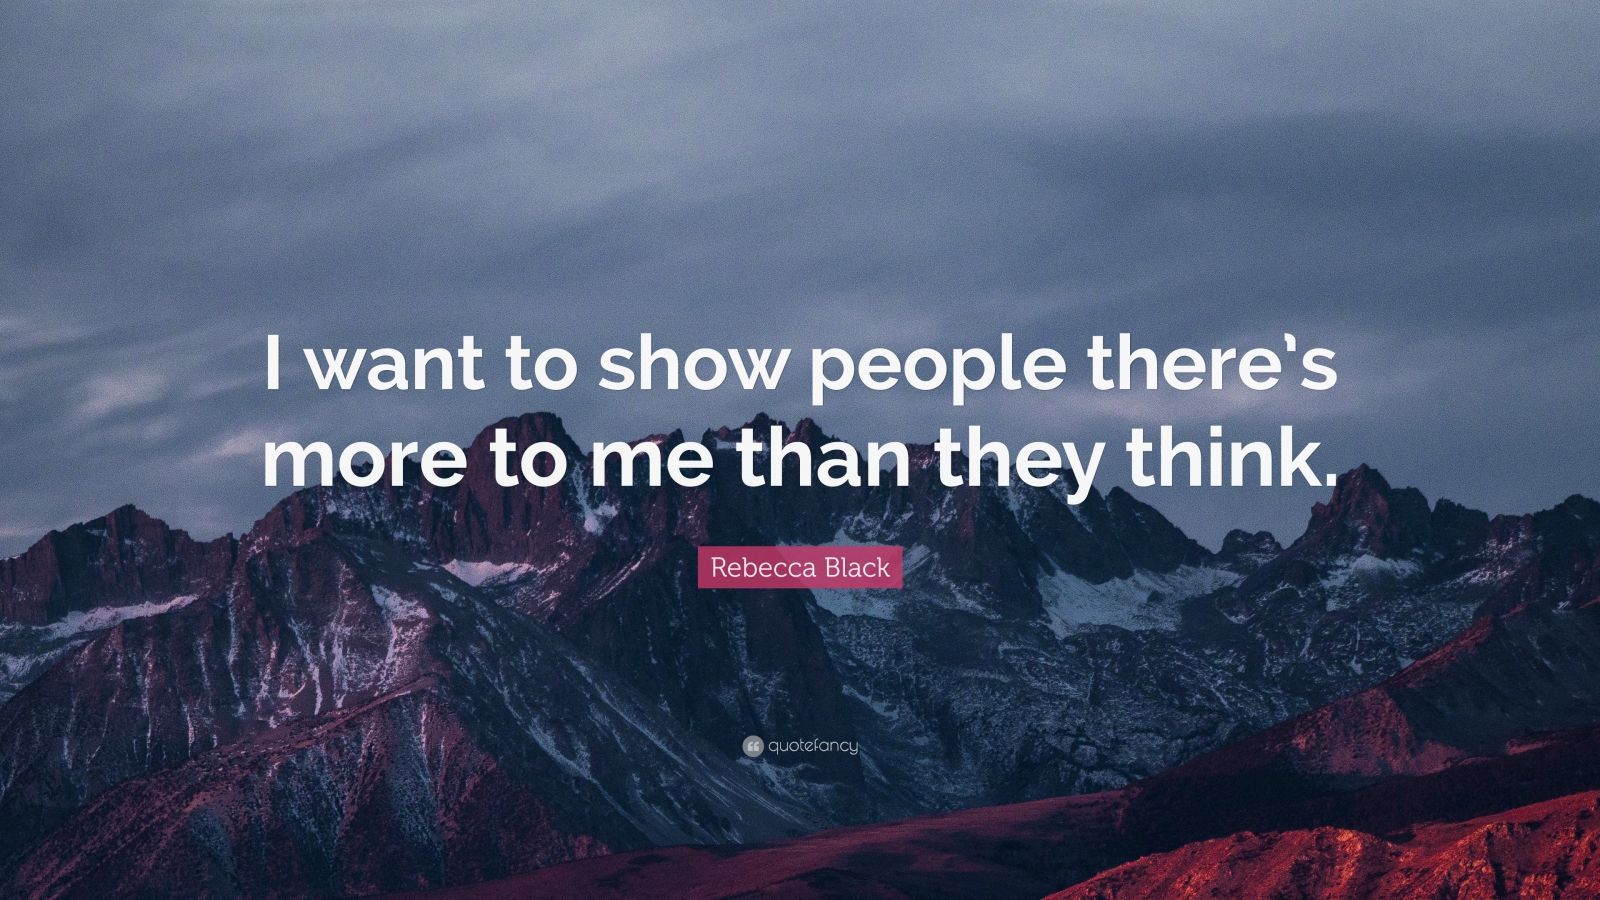 Rebecca Black Quote: “I want to show people there’s more to me than ...